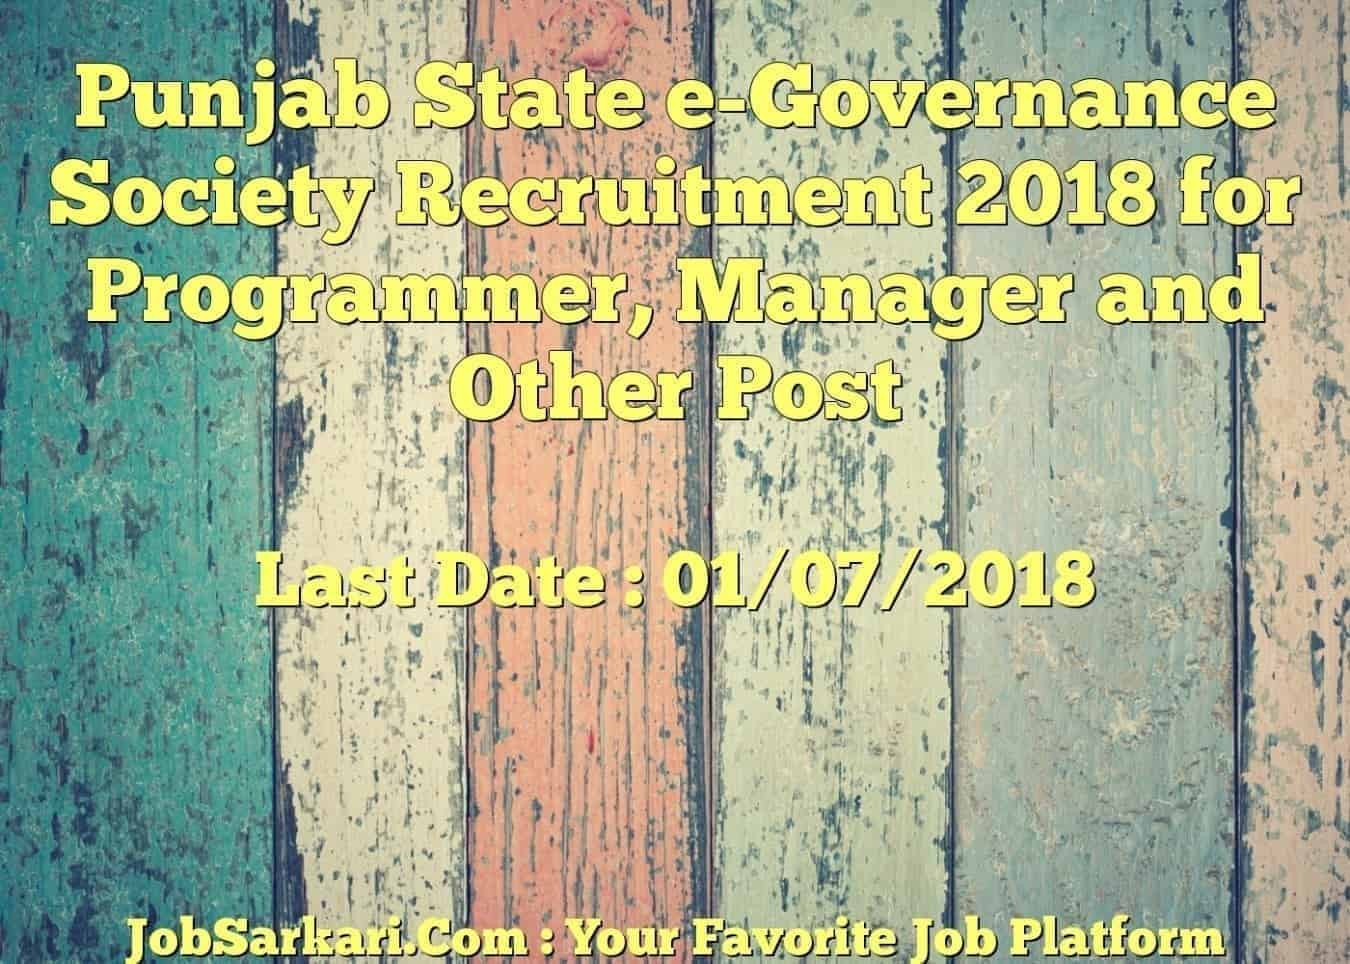 Punjab State e-Governance Society Recruitment 2018 for Programmer, Manager and Other Post